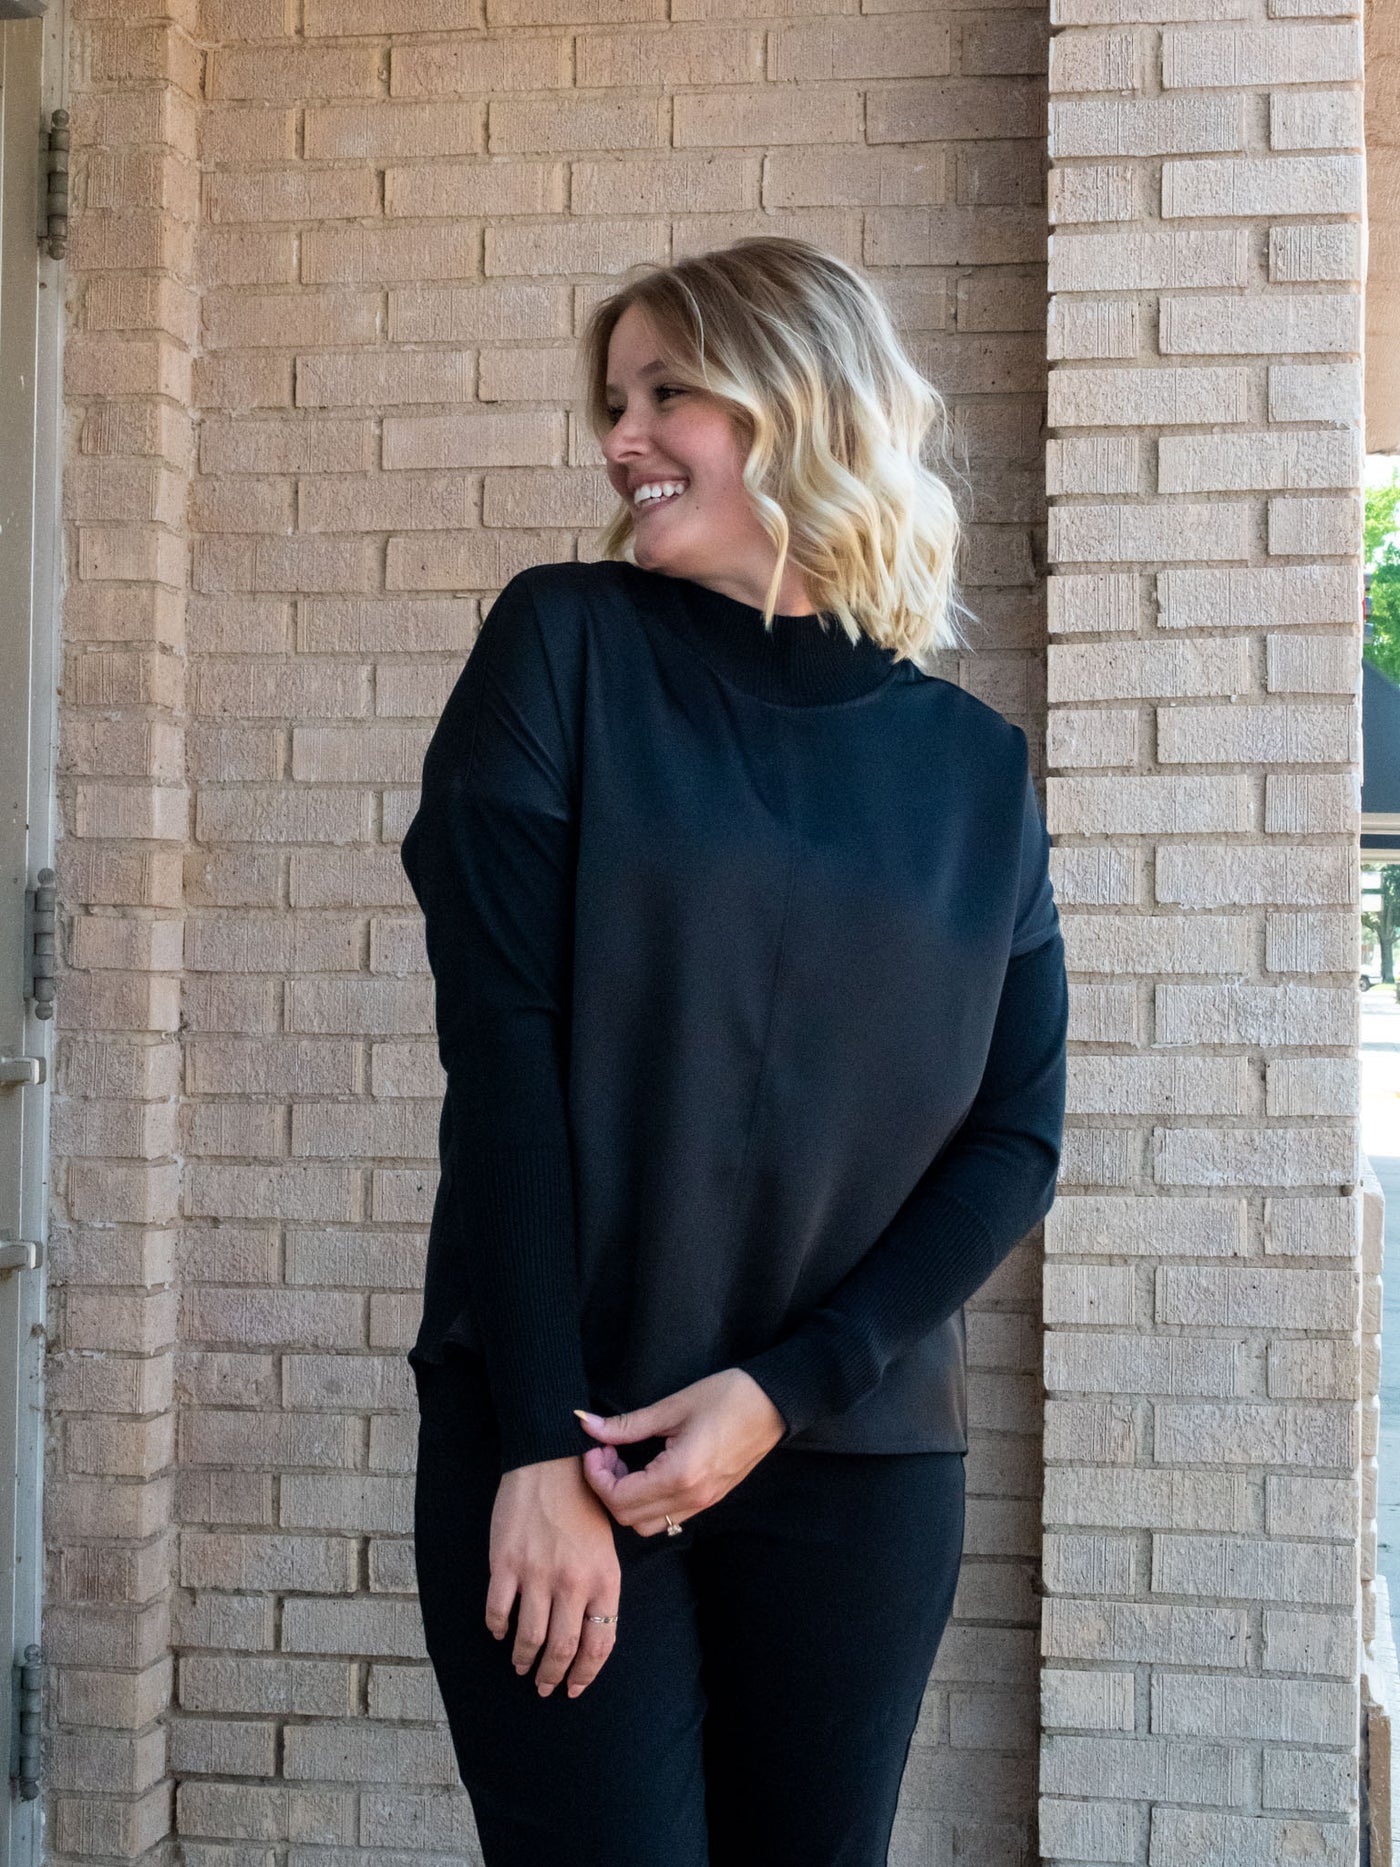 A model wearing a black top with knit sleeves. She has it paired with black pants.